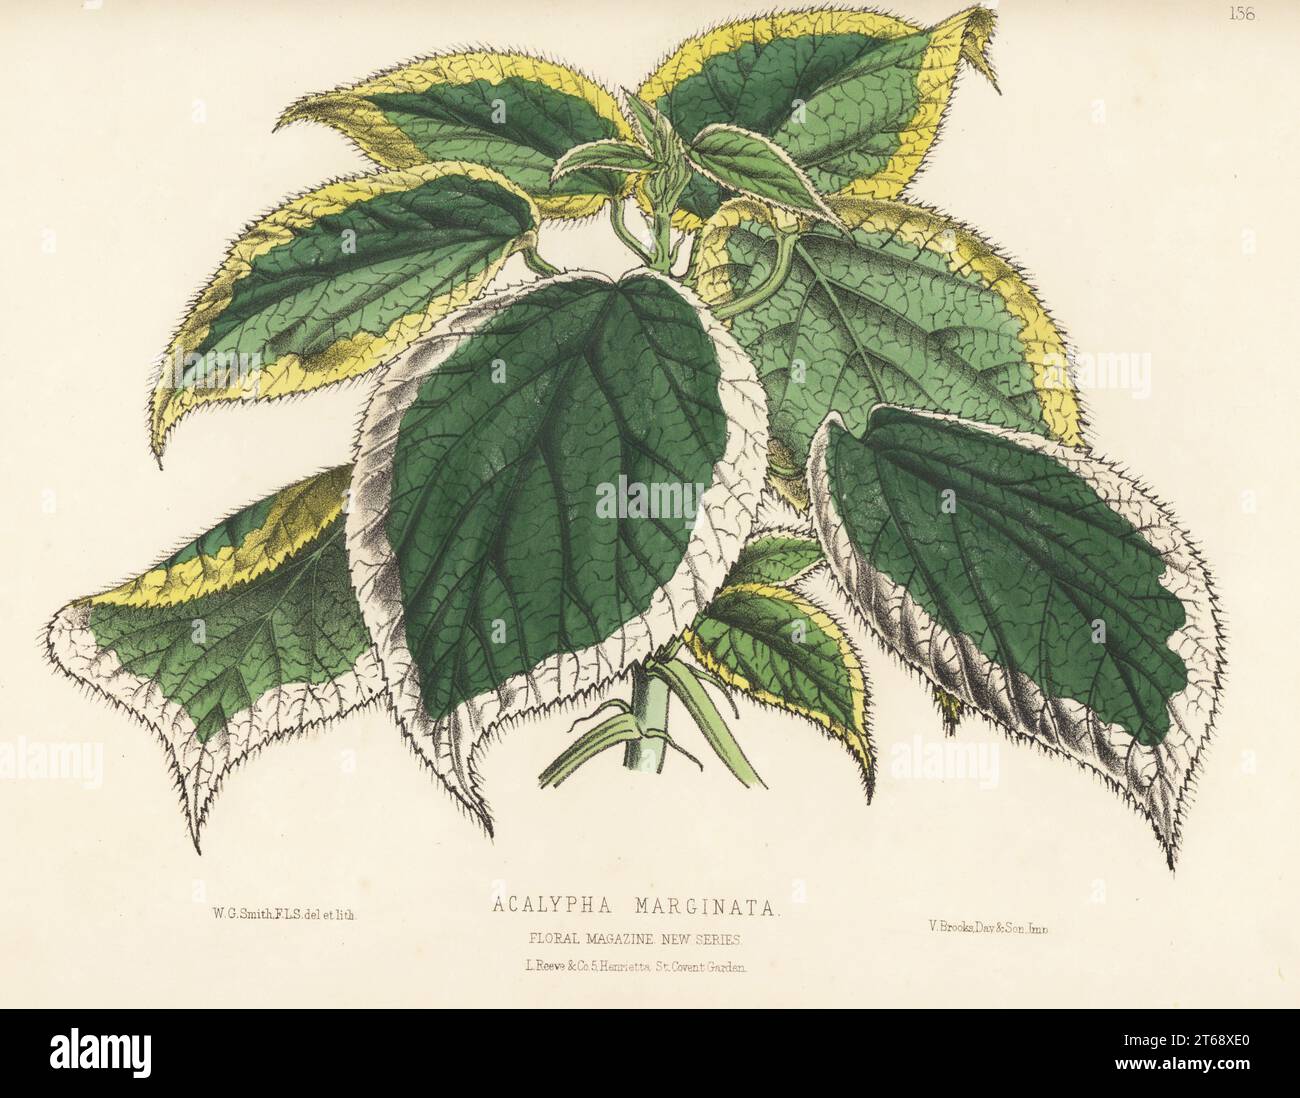 Copperleaf, Acalypha marginata, foliage plant native to the tropics and subtropics. Imported by Benjamin Samuel Williams of Upper Holloway. Handcolored botanical illustration drawn and lithographed by Worthington George Smith from Henry Honywood Dombrain's Floral Magazine, New Series, Volume 4, L. Reeve, London, 1875. Lithograph printed by Vincent Brooks, Day & Son. Stock Photo